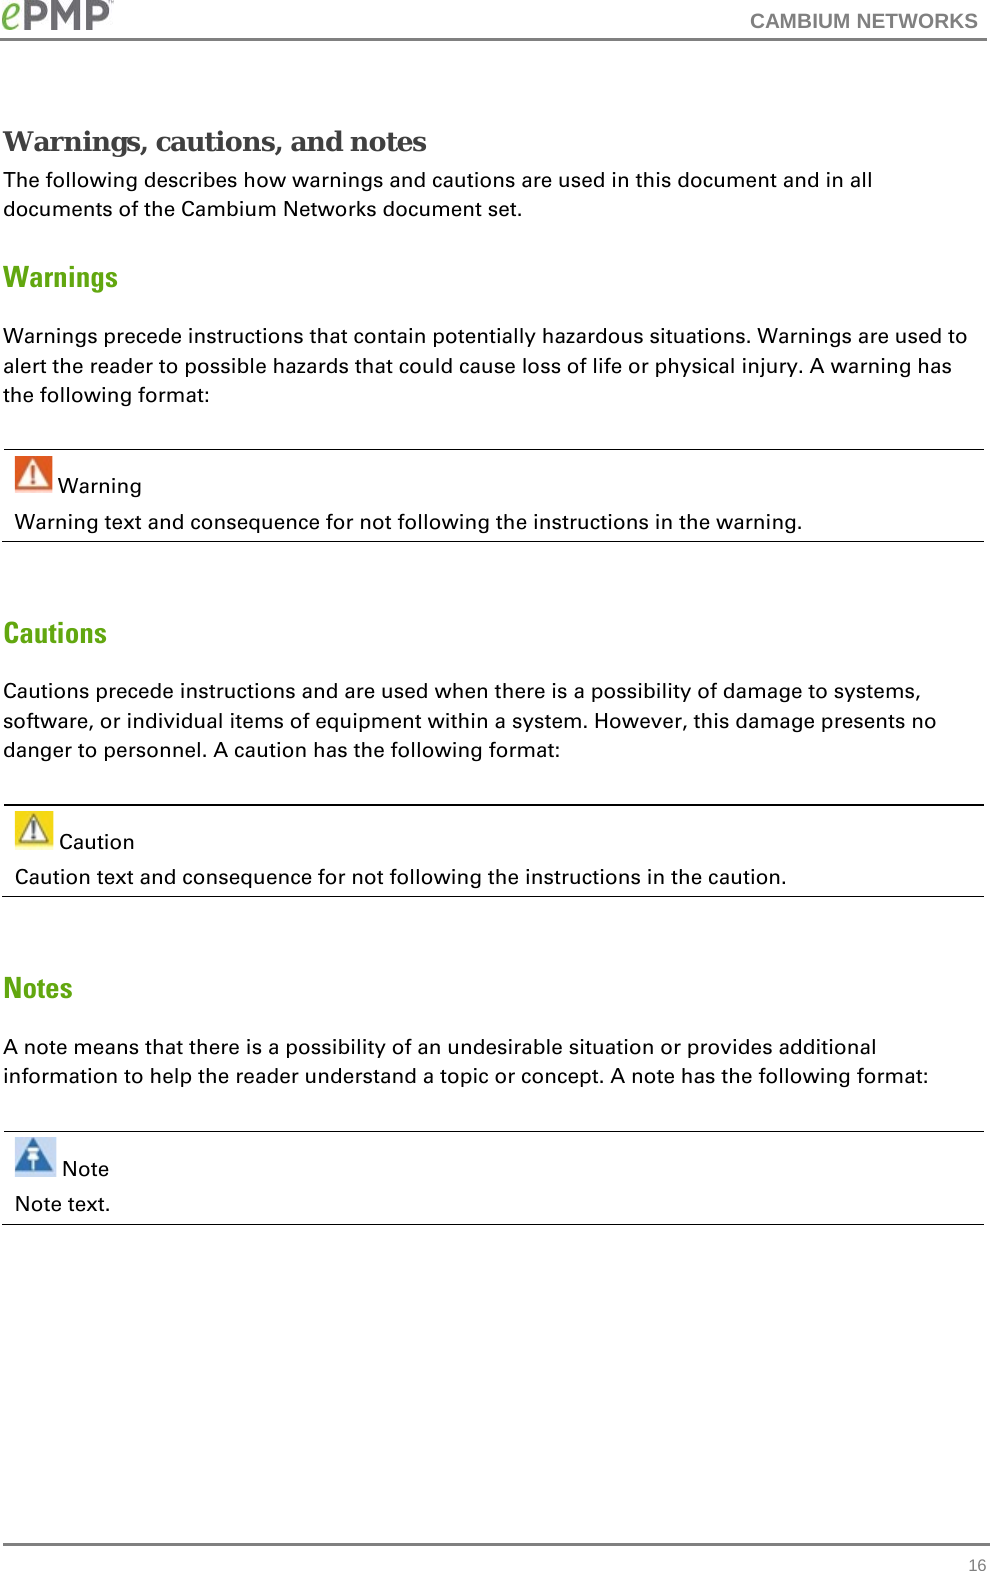 CAMBIUM NETWORKS  Warnings, cautions, and notes The following describes how warnings and cautions are used in this document and in all documents of the Cambium Networks document set. Warnings Warnings precede instructions that contain potentially hazardous situations. Warnings are used to alert the reader to possible hazards that could cause loss of life or physical injury. A warning has the following format:   Warning Warning text and consequence for not following the instructions in the warning.  Cautions Cautions precede instructions and are used when there is a possibility of damage to systems, software, or individual items of equipment within a system. However, this damage presents no danger to personnel. A caution has the following format:   Caution Caution text and consequence for not following the instructions in the caution.  Notes A note means that there is a possibility of an undesirable situation or provides additional information to help the reader understand a topic or concept. A note has the following format:   Note Note text.   16 